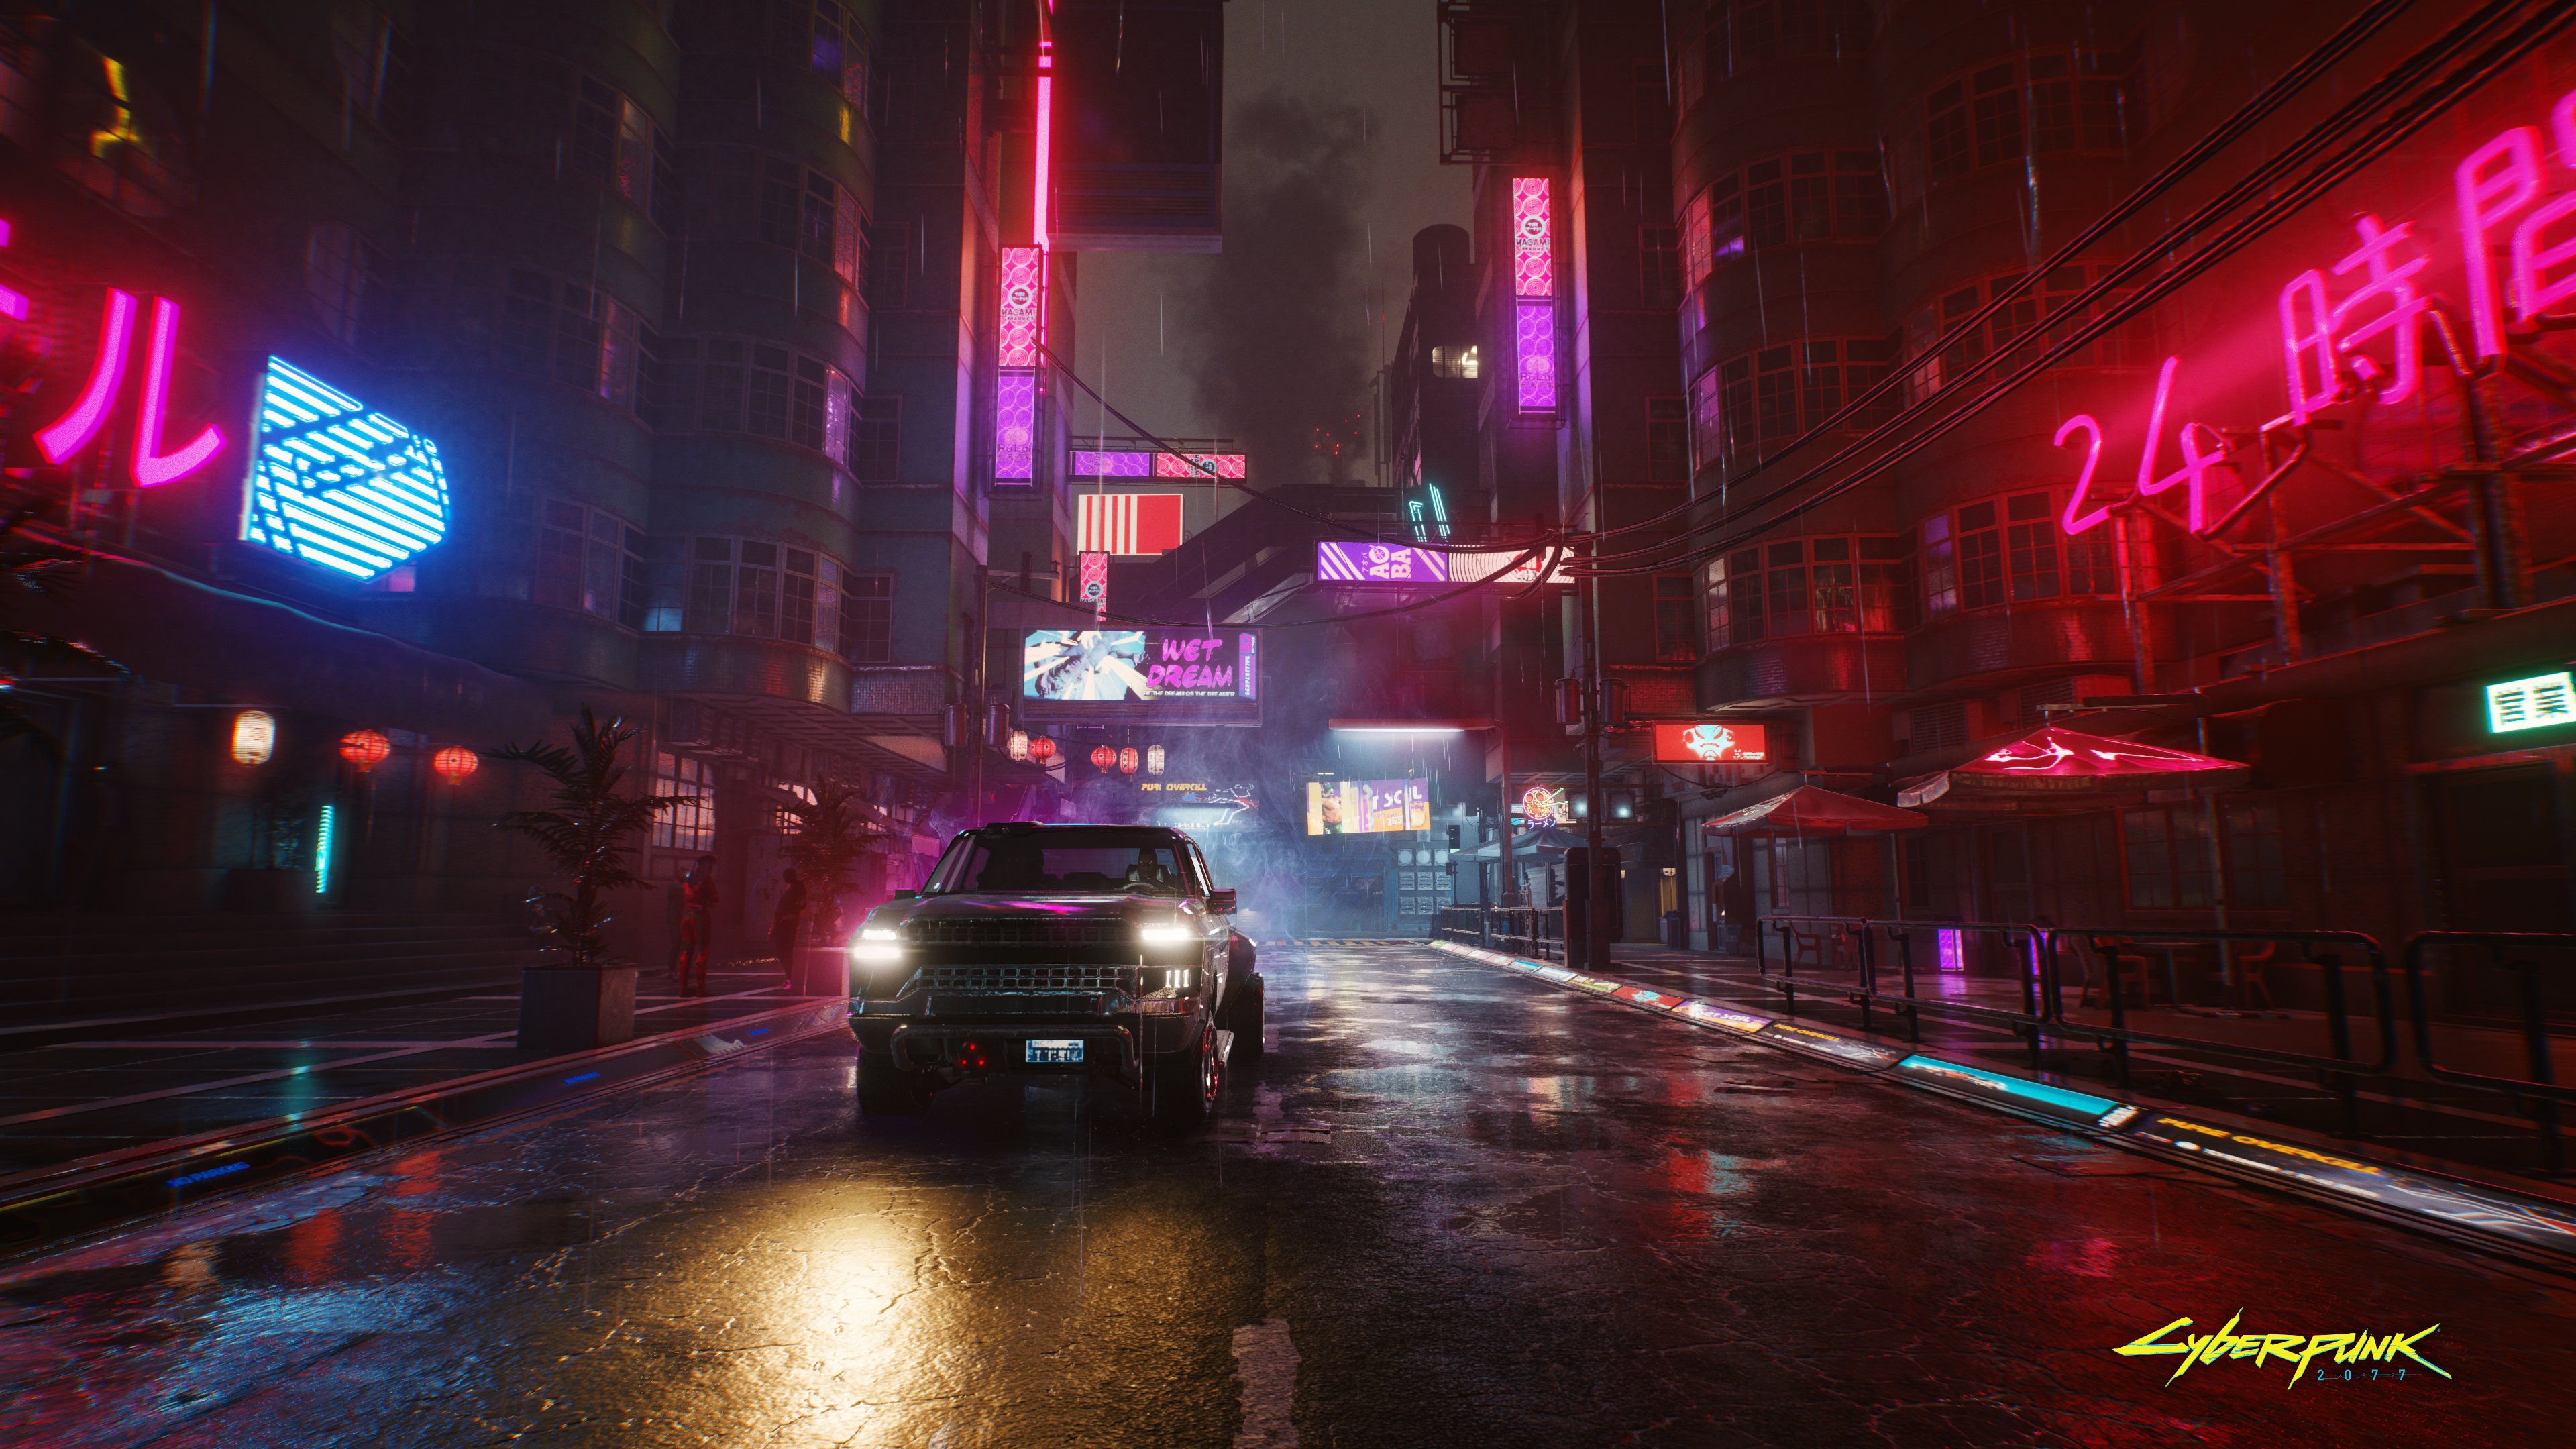 Cyberpunk 2077 2 - Sci fi city at night from the upcoming computer game